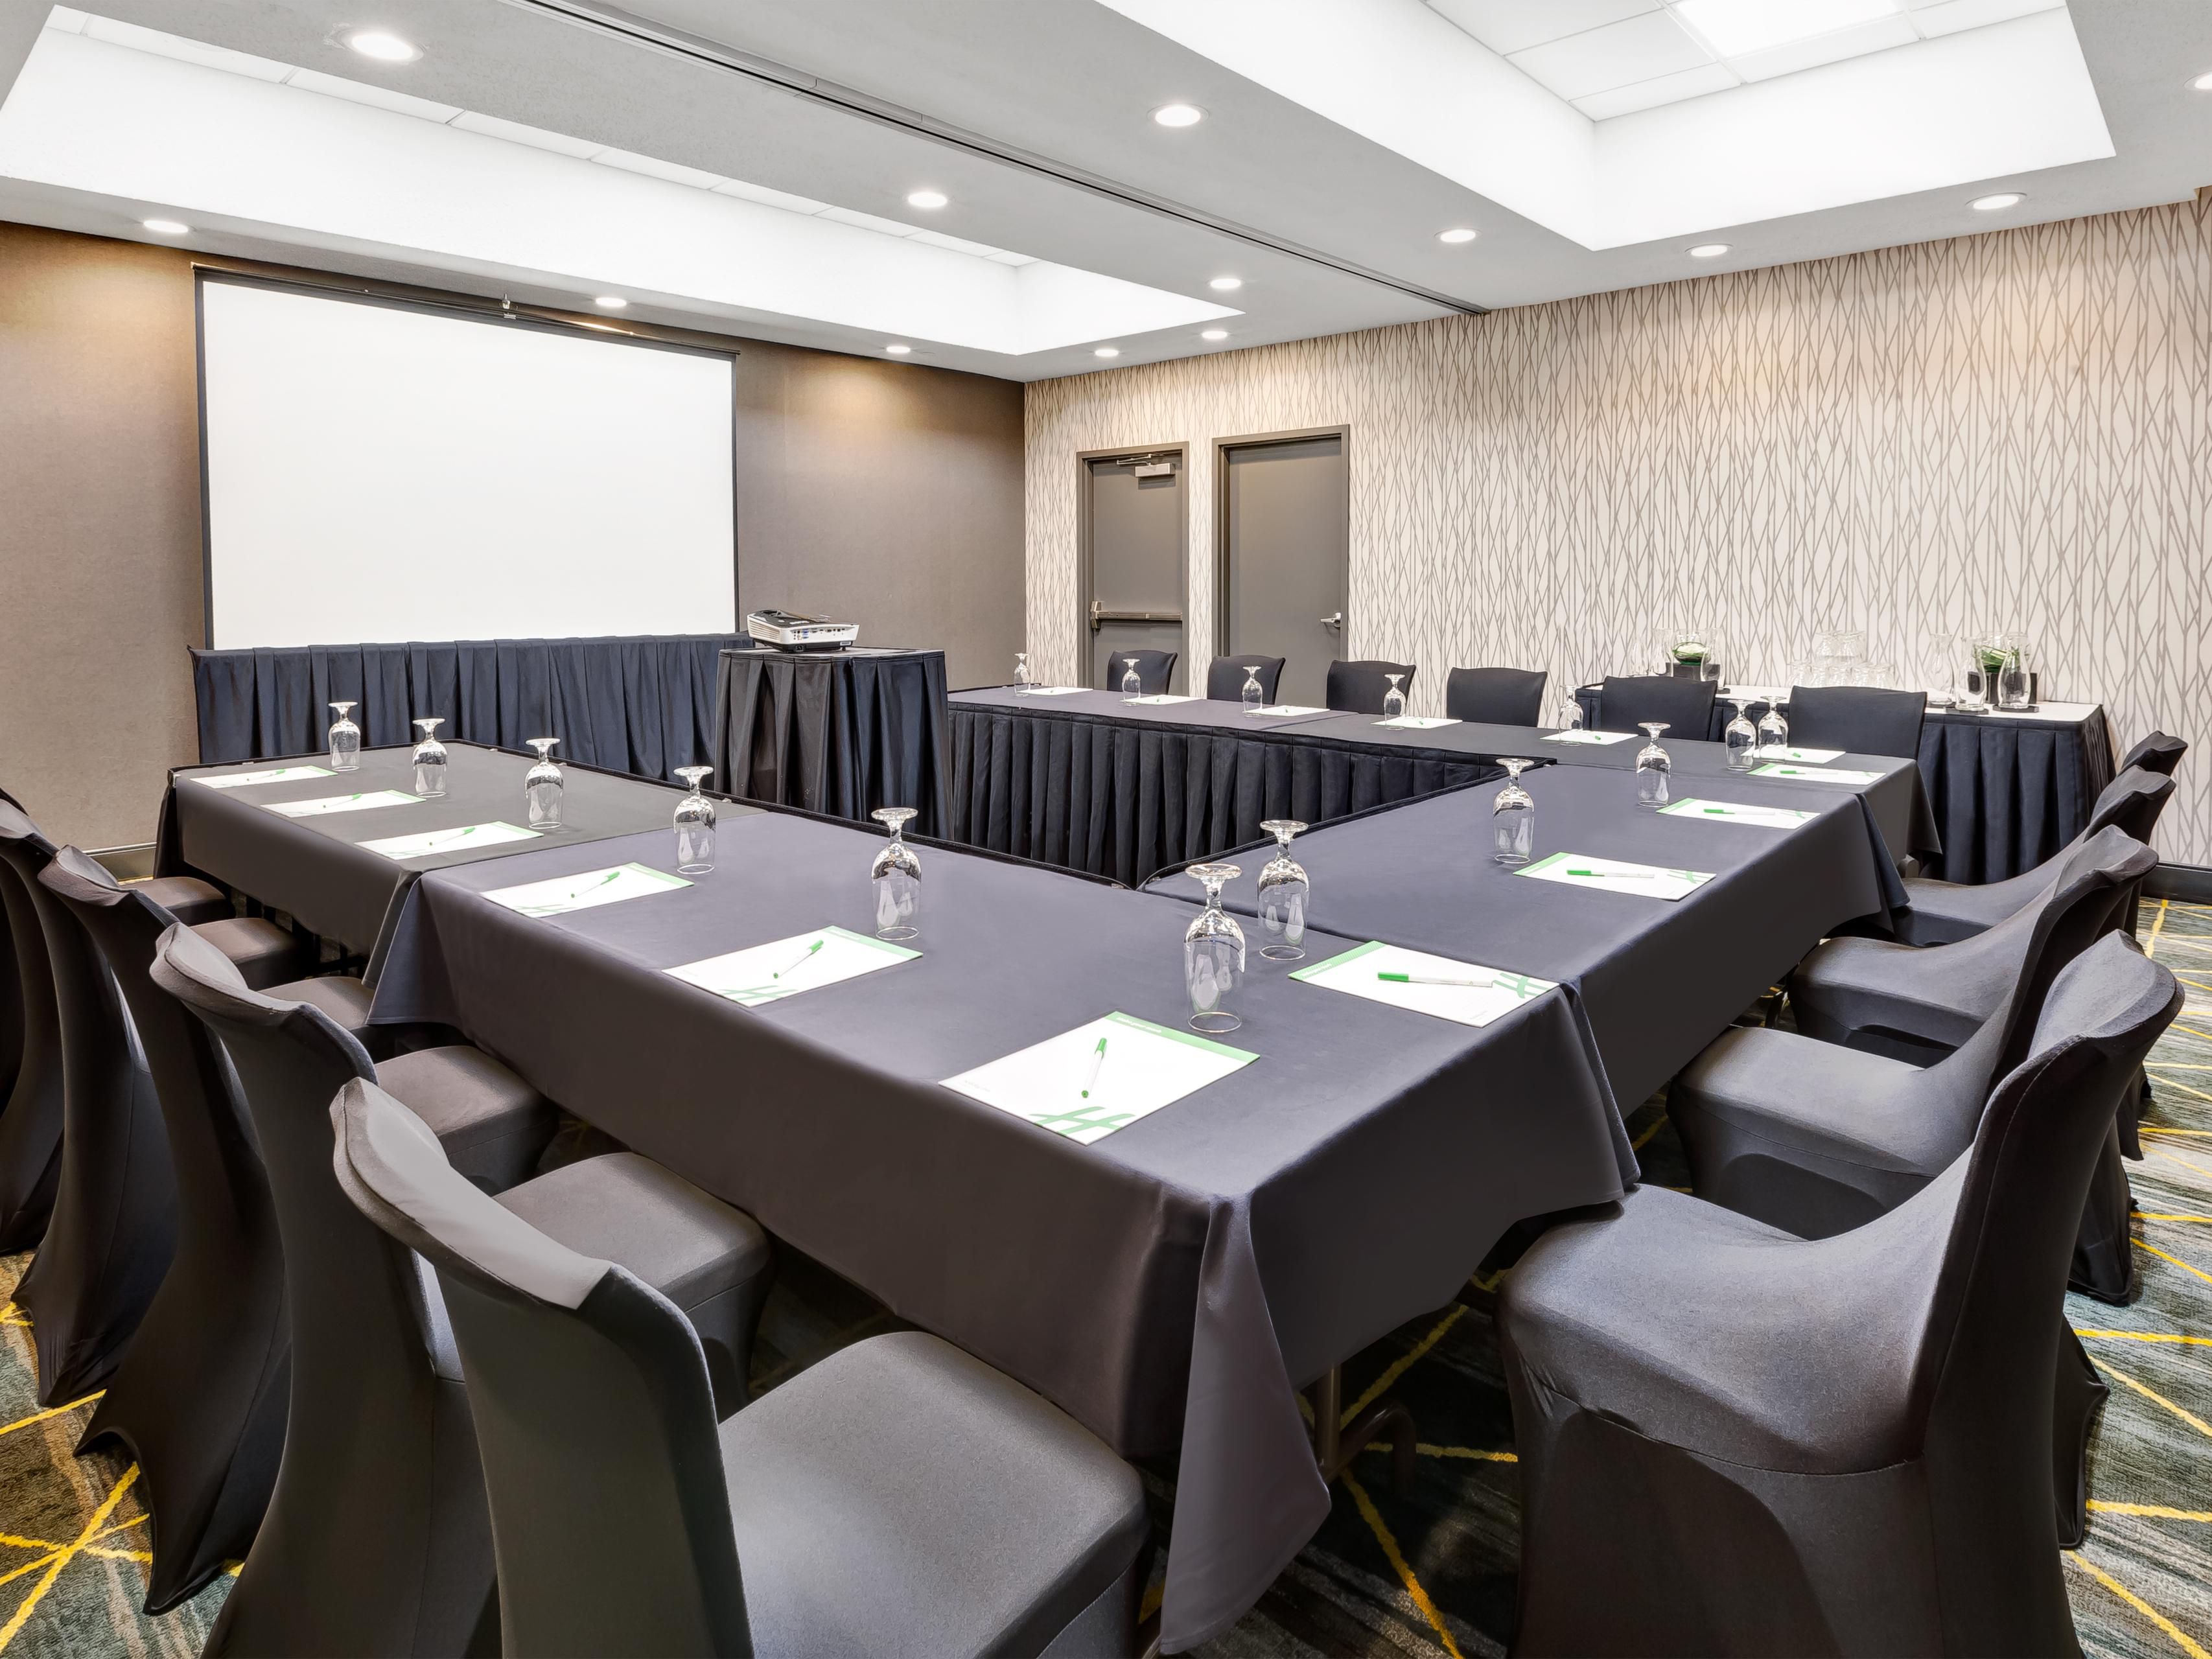 With over 1,263 sq ft of versatile meeting space, we have the ideal venue for crafting unforgettable events in the heart of downtown Grand Rapids. Our dedicated staff is here to support you every step of the way, from your initial inquiry to the successful conclusion of your event. Your vision is our mission.